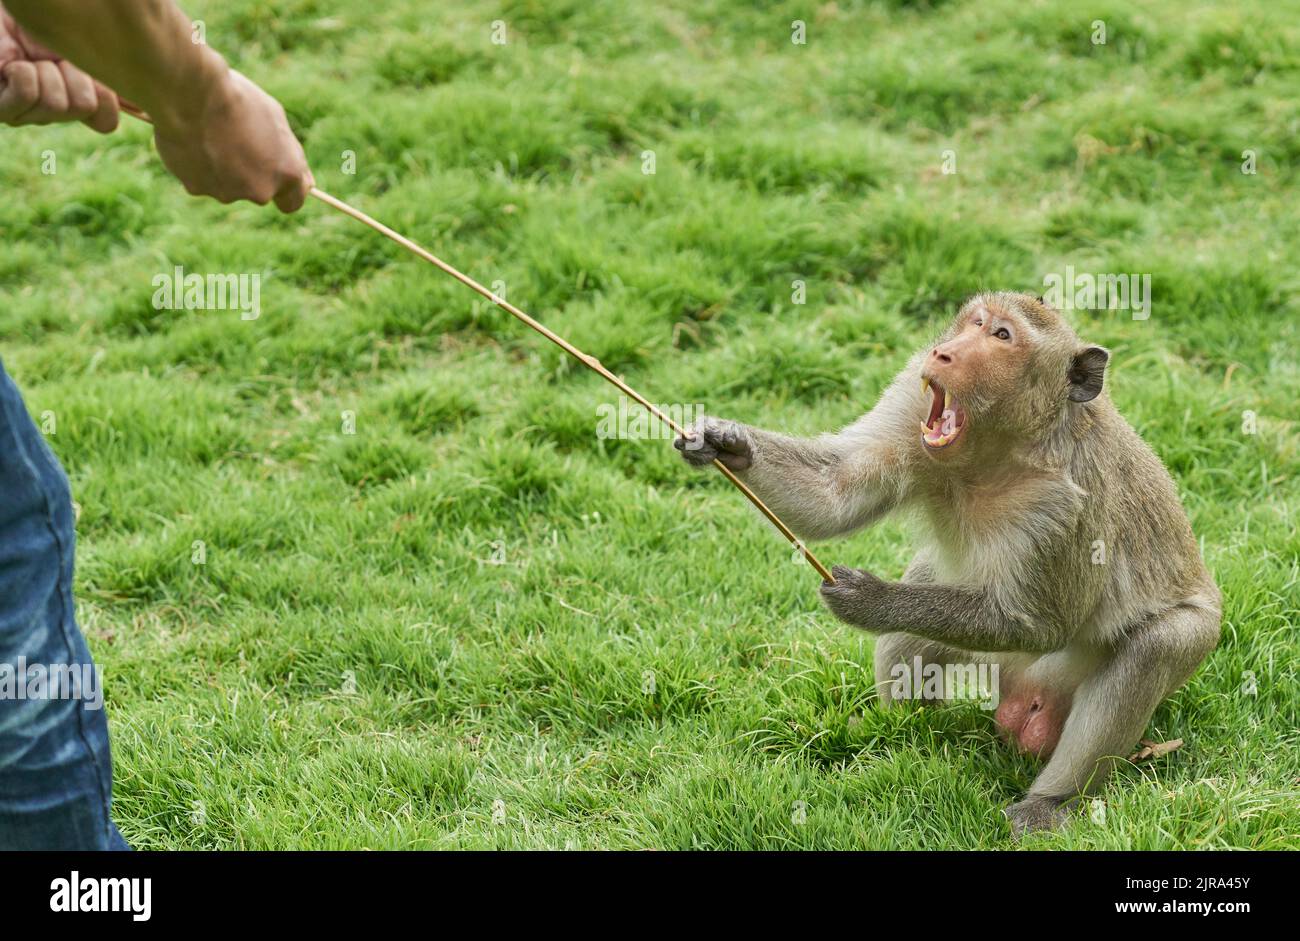 A very angry aggressive monkey. Stock Photo